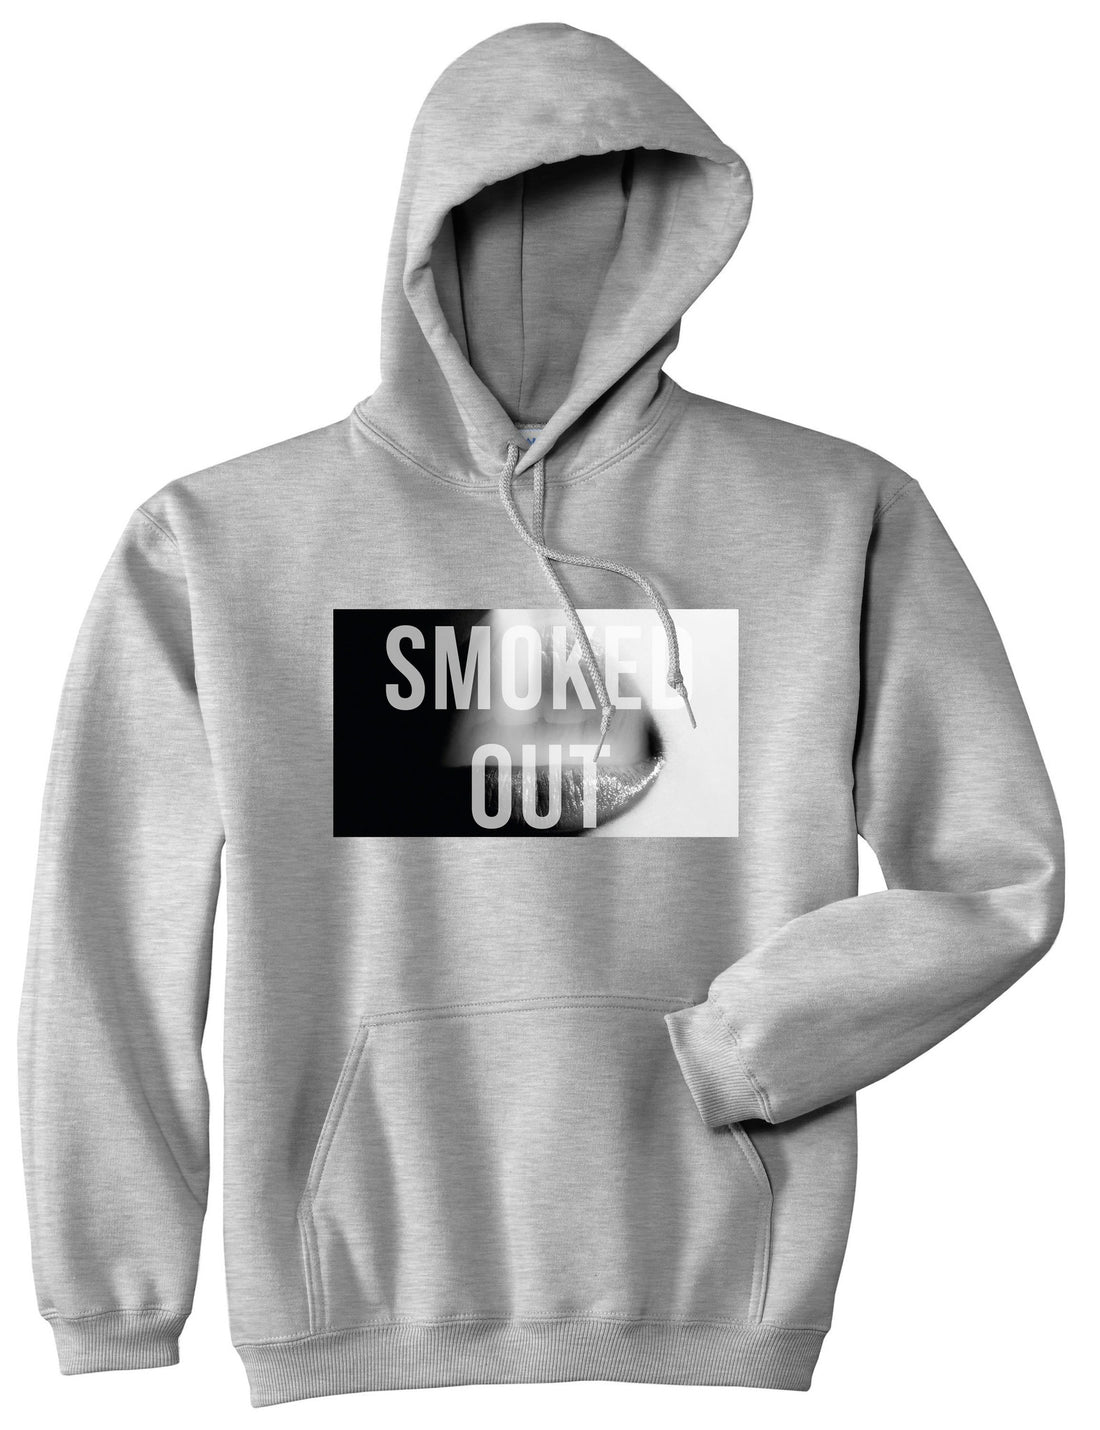 Smoked Out Weed Marijuana Girls Pot New York Boys Kids Pullover Hoodie Hoody In Grey by Kings Of NY